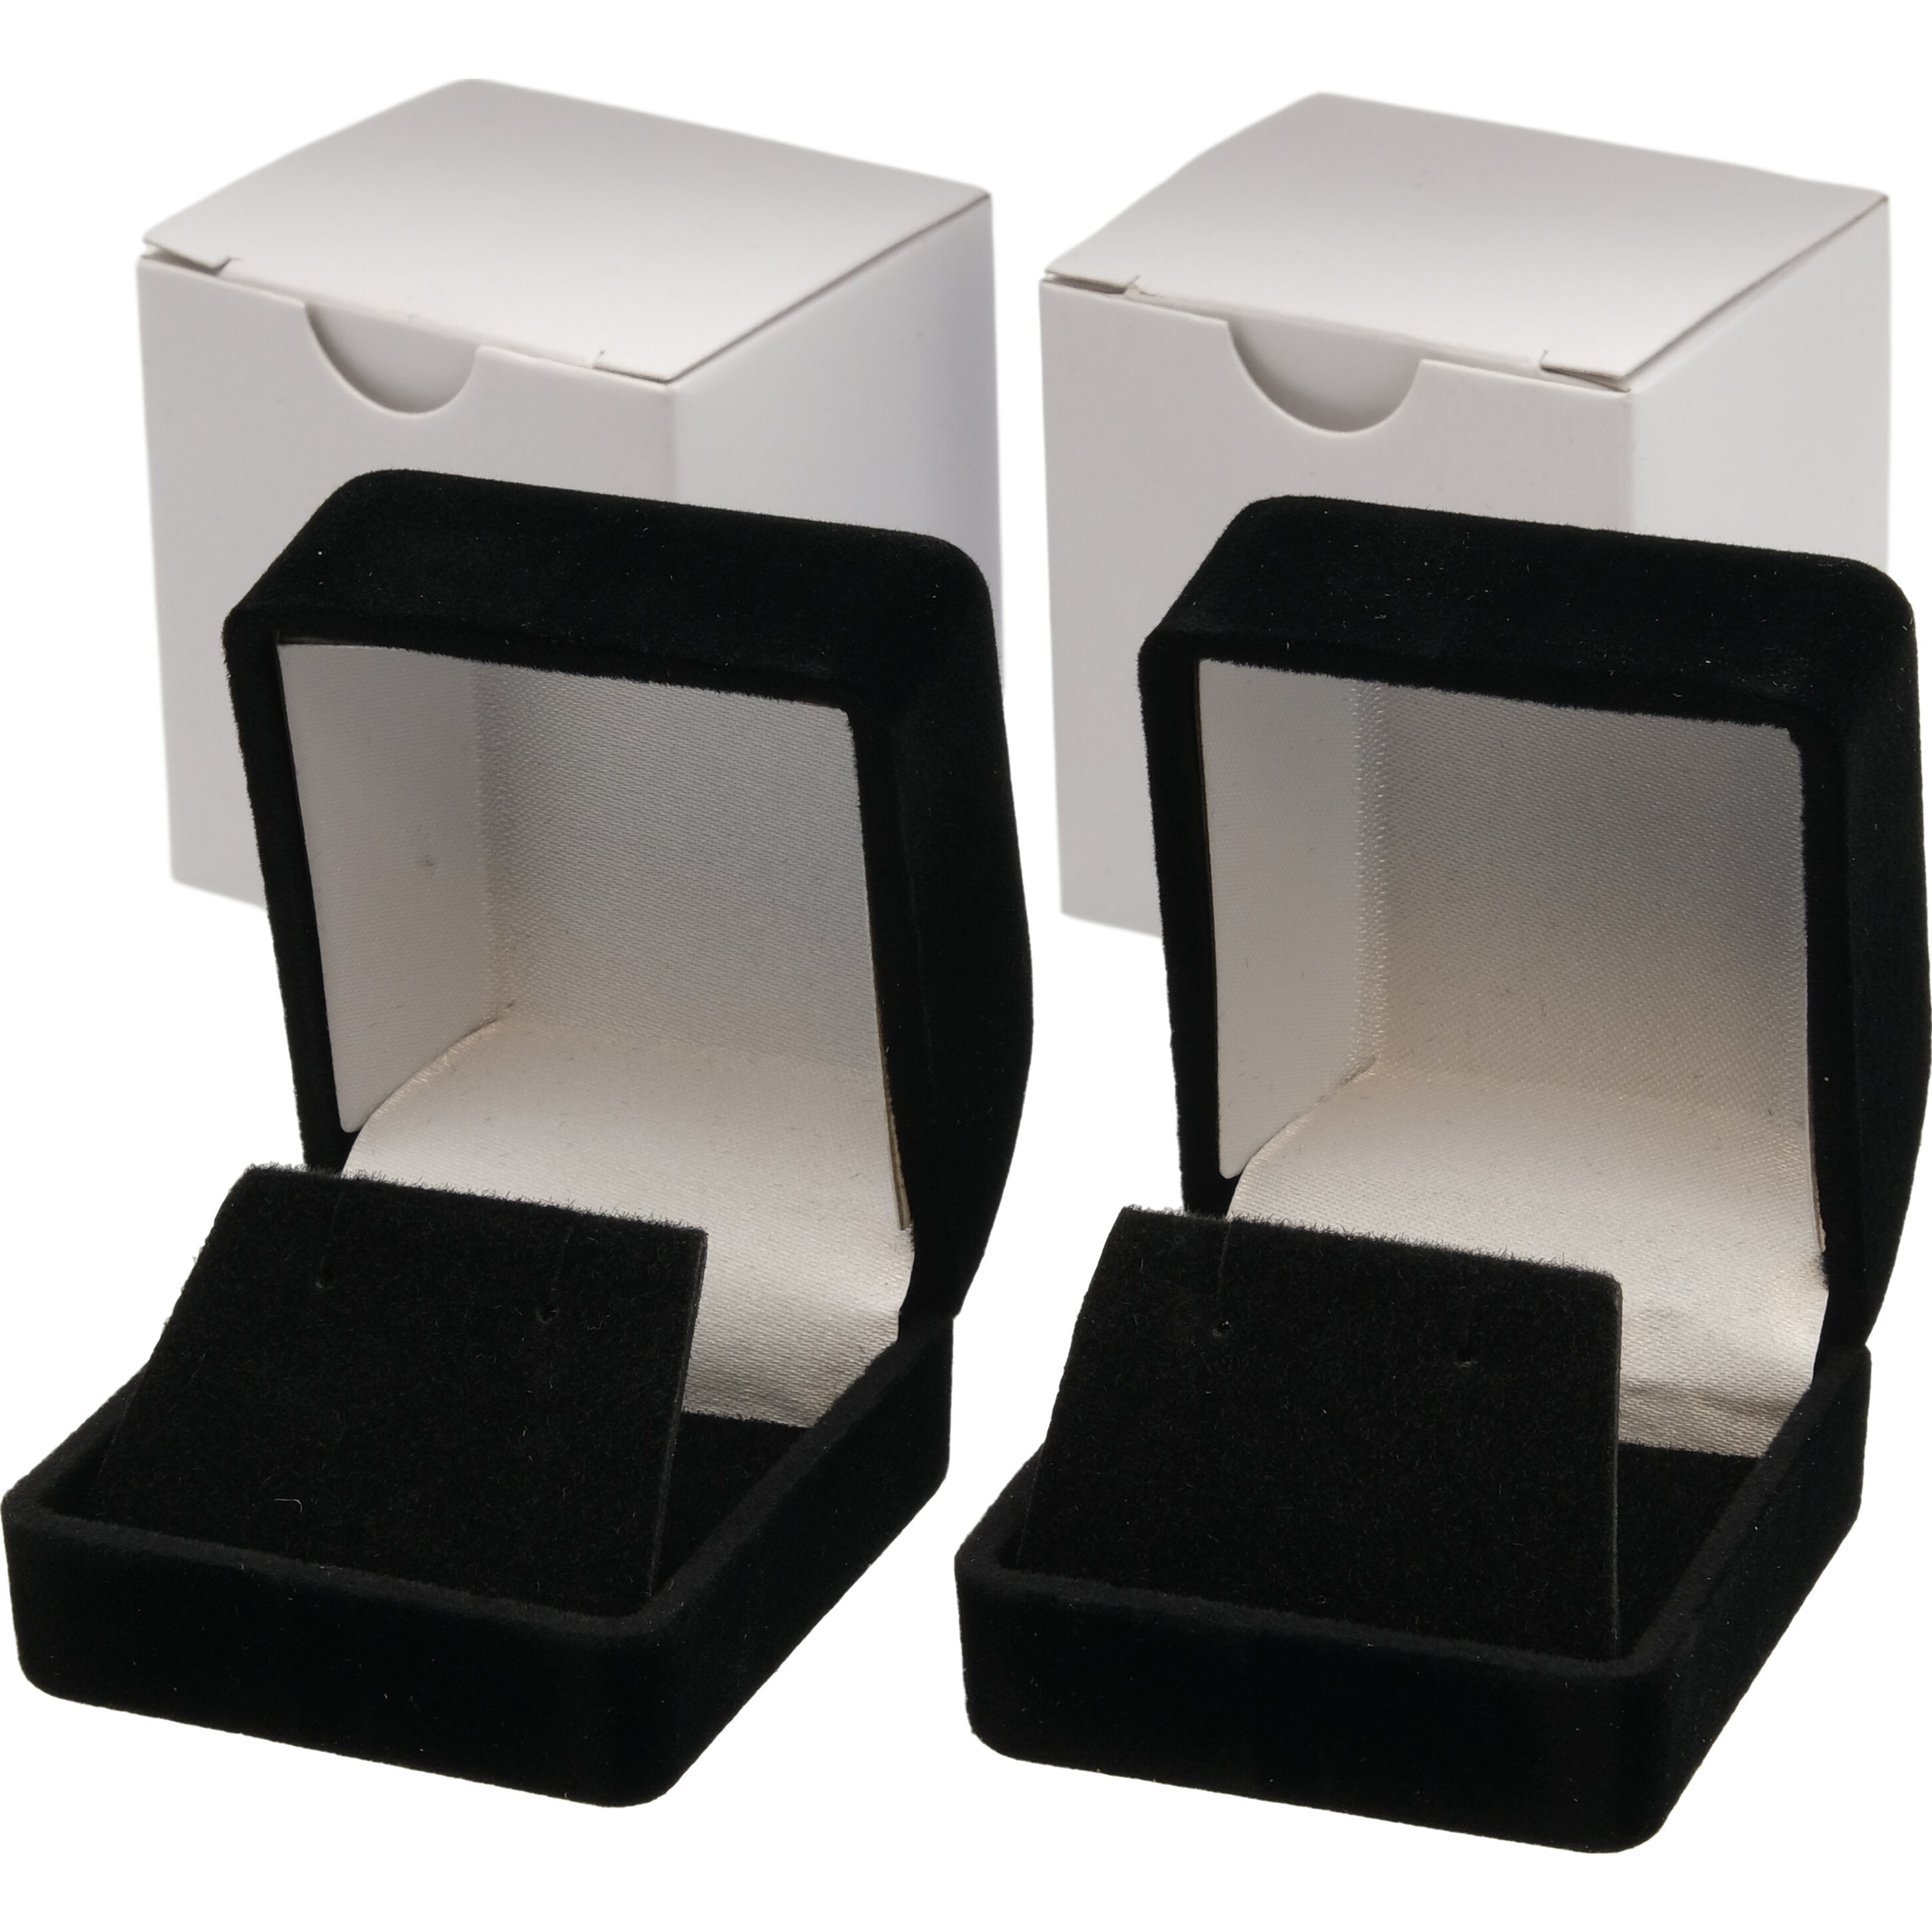 Blue Classic Leatherette Jewellery Ring Boxes Black 